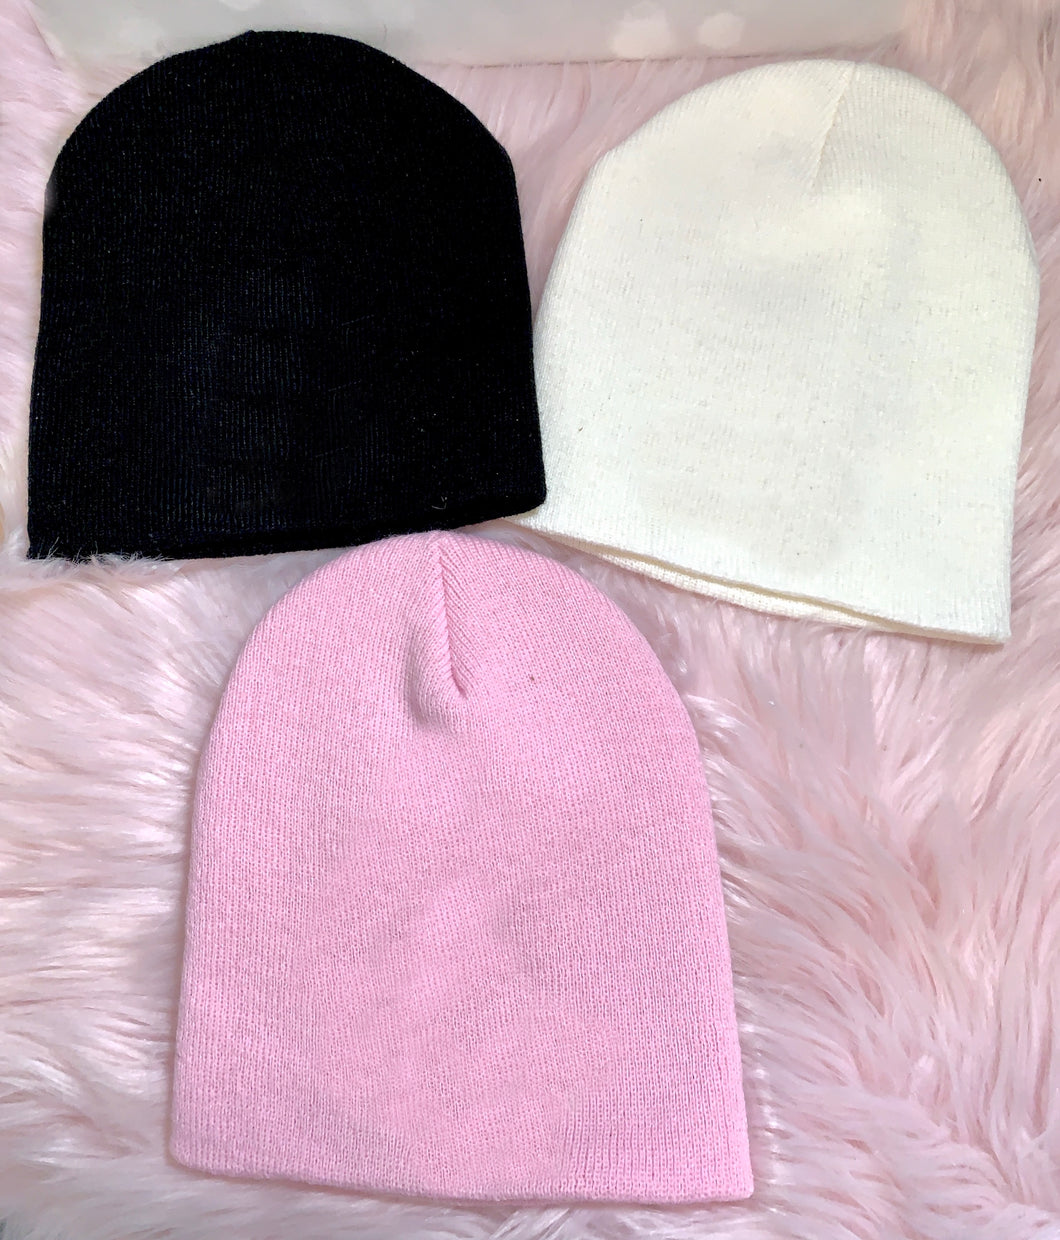 Glam Beanies with Bling